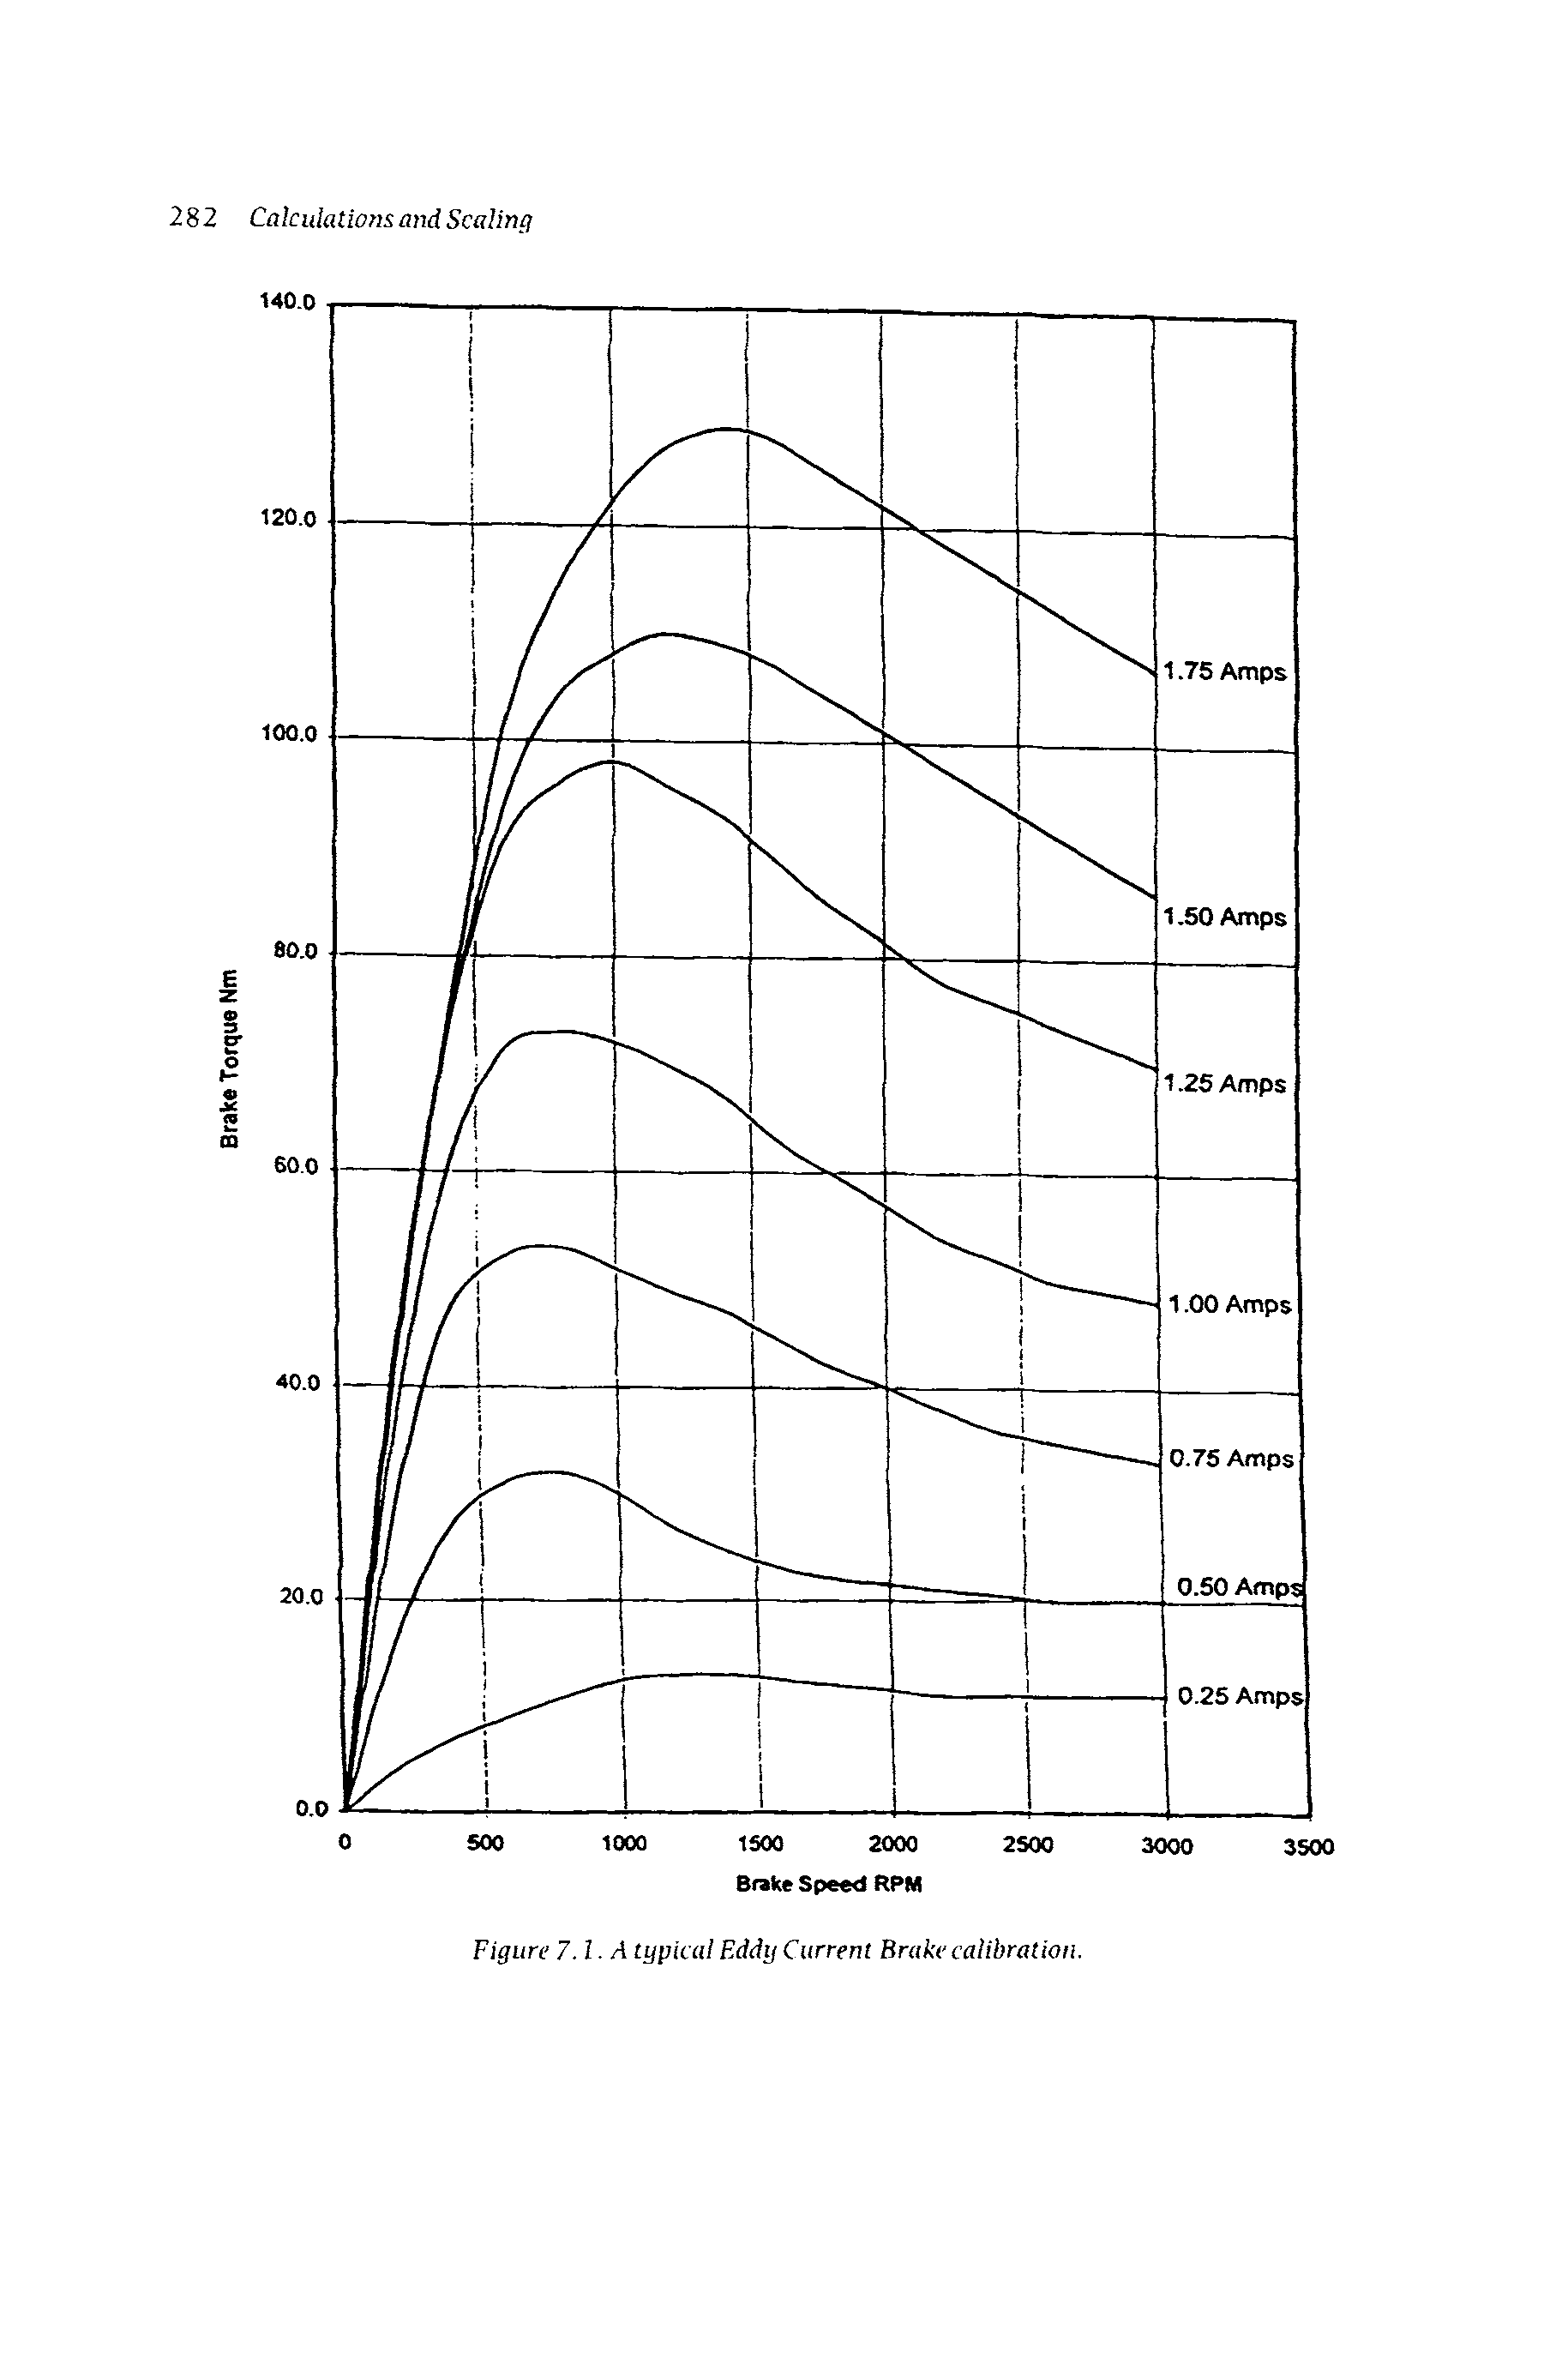 Figure 7.1. A typical Eddy Current Brake calibration.